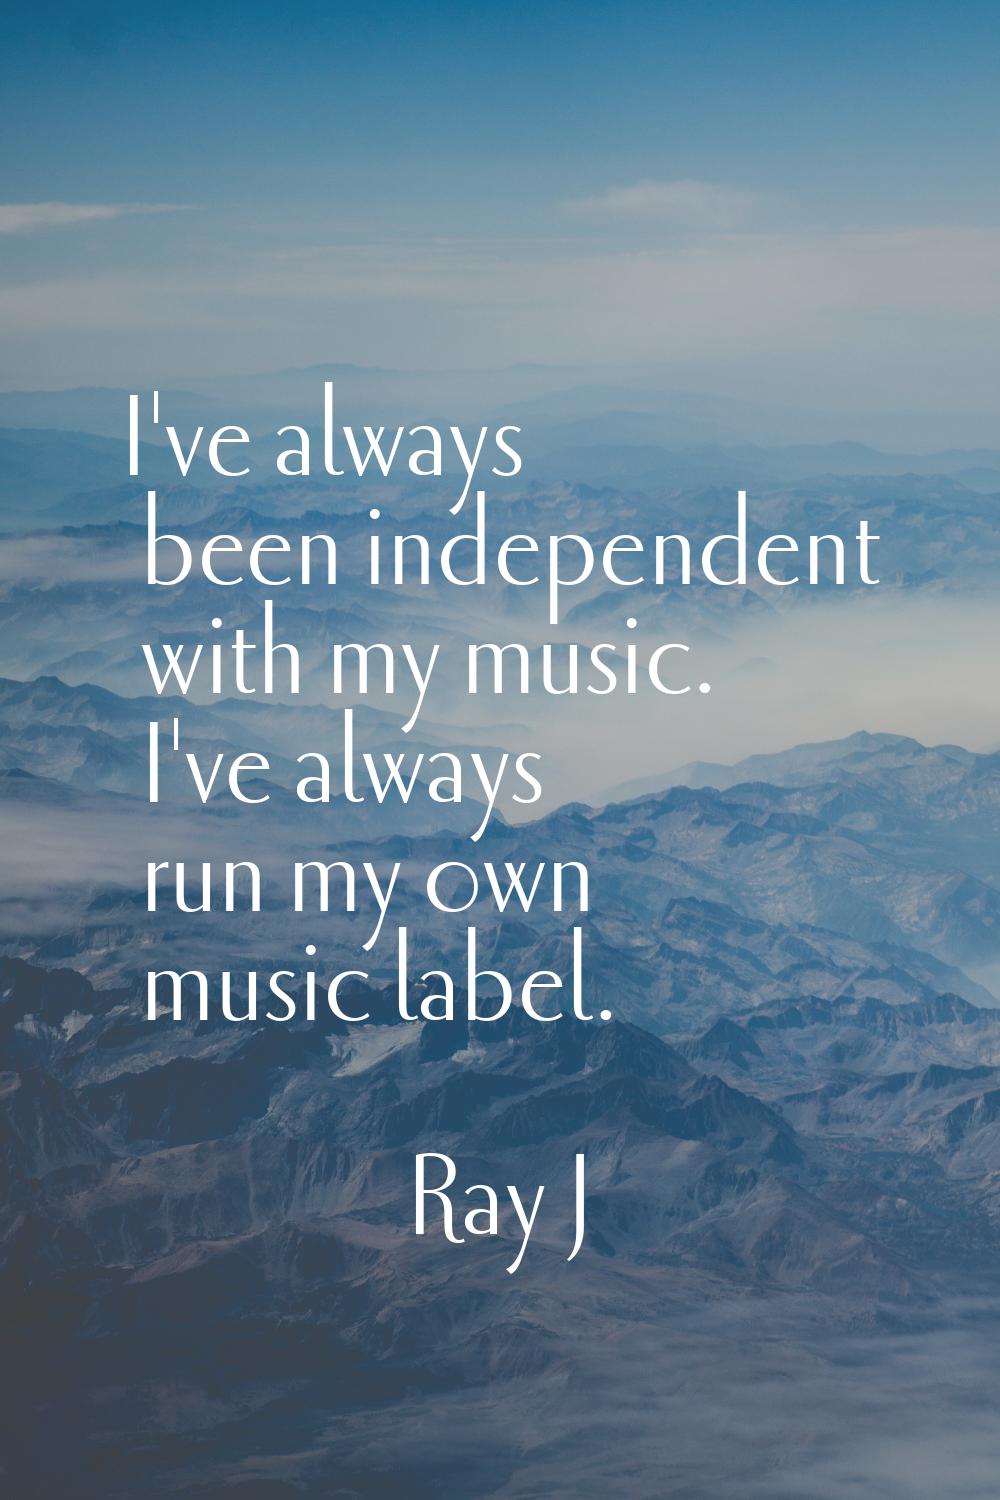 I've always been independent with my music. I've always run my own music label.